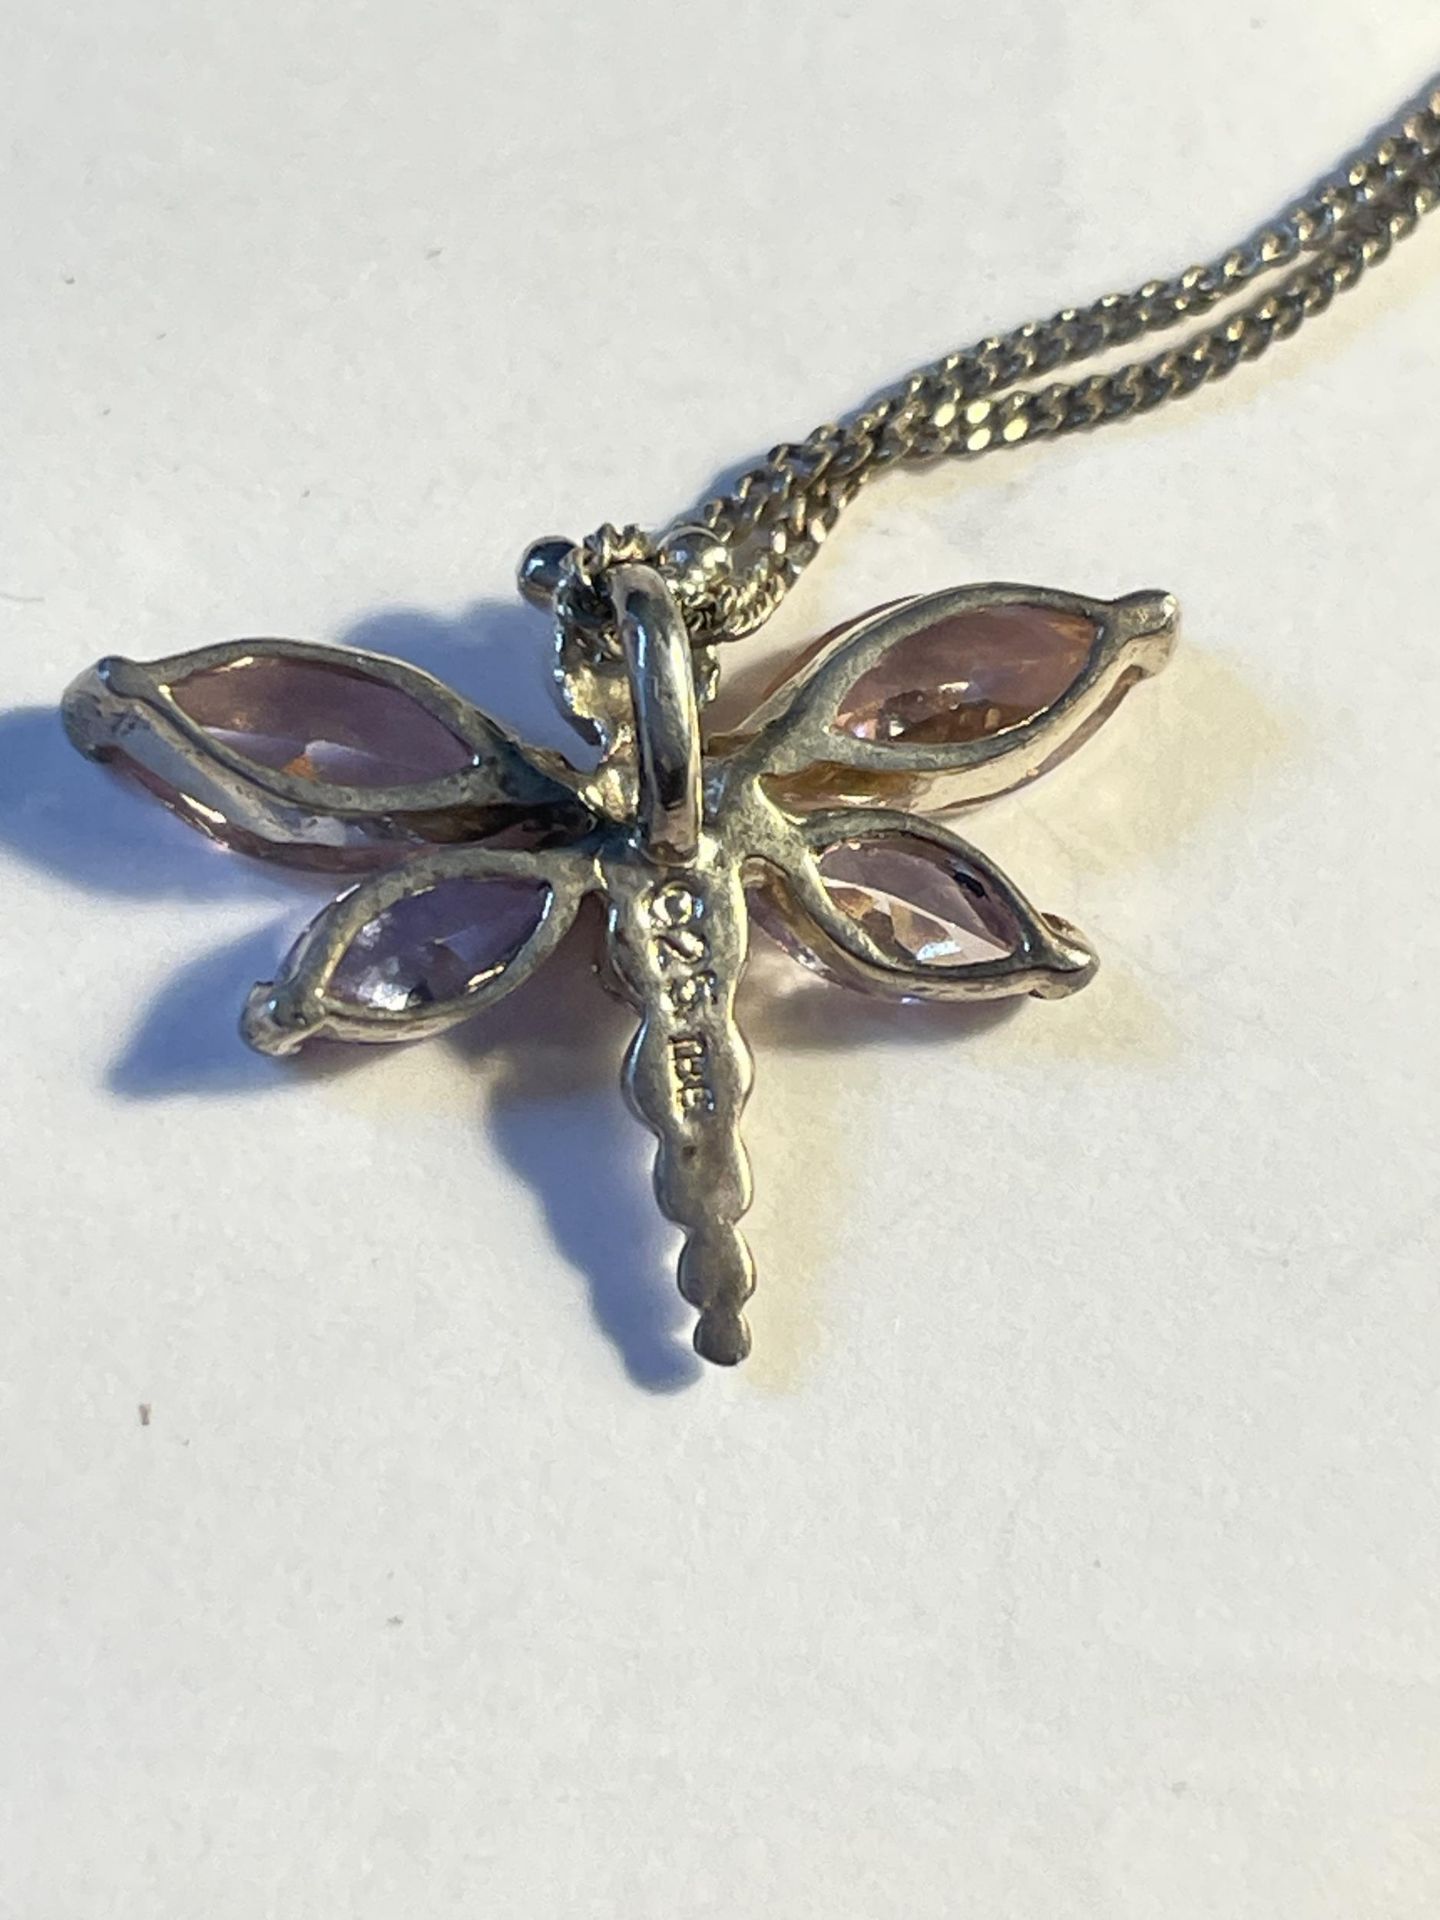 A MARKED 925 SILVER NECKLACE WITH A SILVER AND COLOURED STONE DRAGONFLY PENDANT - Image 3 of 3